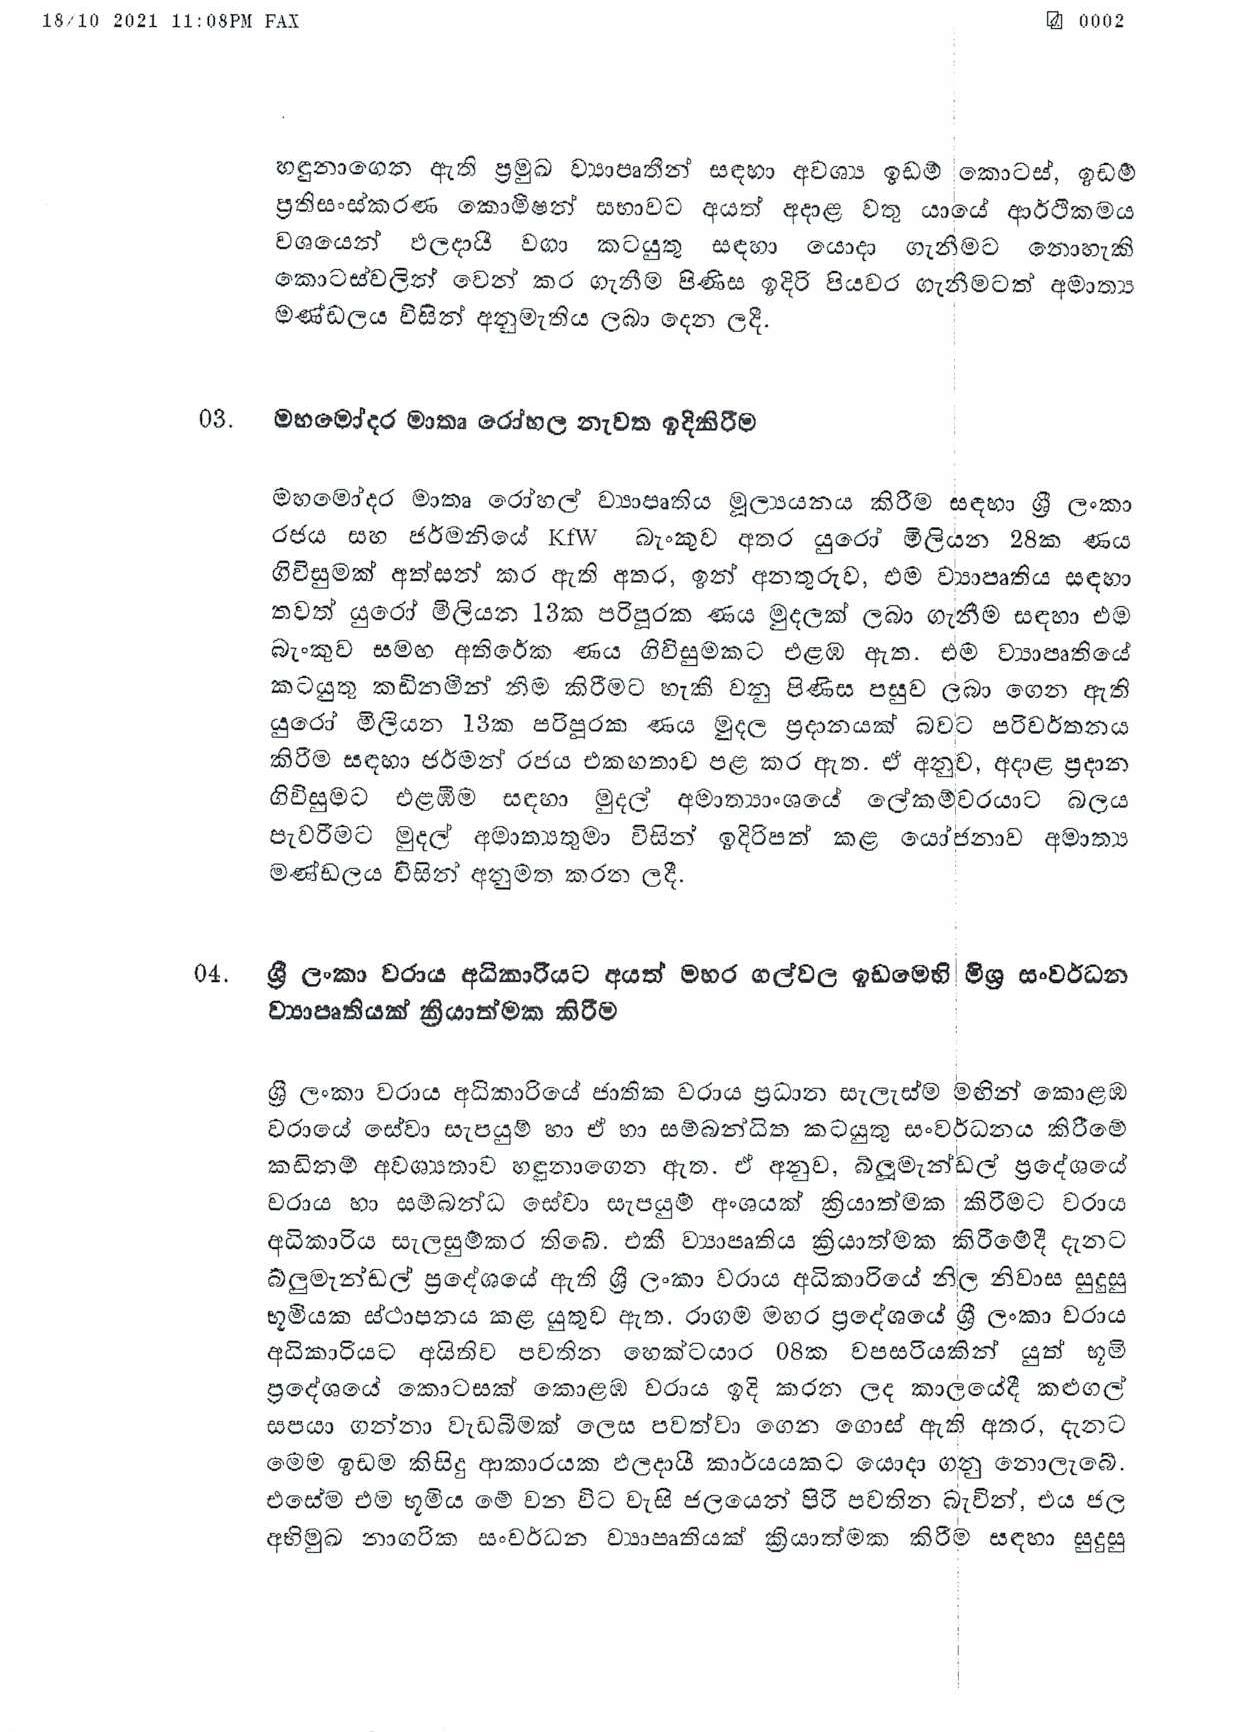 Cabinet Decision on 18.10.2021 compressed page 002